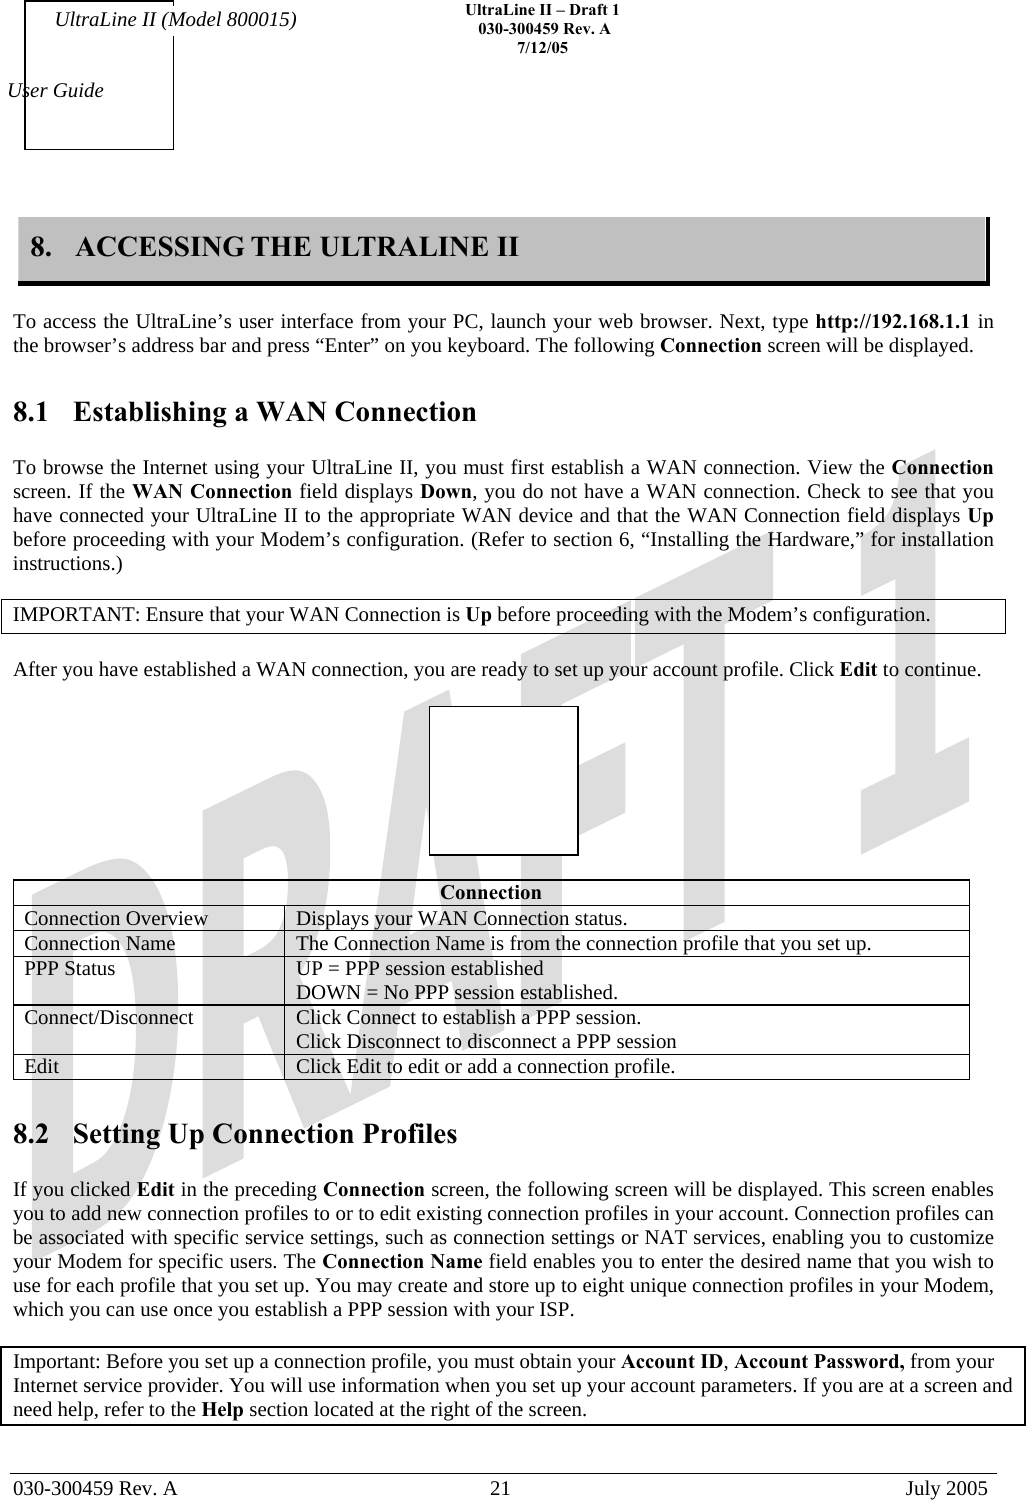    UltraLine II – Draft 1   030-300459 Rev. A 7/12/05   030-300459 Rev. A  21  July 2005  User Guide UltraLine II (Model 800015) 8.  ACCESSING THE ULTRALINE II  To access the UltraLine’s user interface from your PC, launch your web browser. Next, type http://192.168.1.1 in the browser’s address bar and press “Enter” on you keyboard. The following Connection screen will be displayed.  8.1  Establishing a WAN Connection  To browse the Internet using your UltraLine II, you must first establish a WAN connection. View the Connection screen. If the WAN Connection field displays Down, you do not have a WAN connection. Check to see that you have connected your UltraLine II to the appropriate WAN device and that the WAN Connection field displays Up before proceeding with your Modem’s configuration. (Refer to section 6, “Installing the Hardware,” for installation instructions.)  IMPORTANT: Ensure that your WAN Connection is Up before proceeding with the Modem’s configuration.  After you have established a WAN connection, you are ready to set up your account profile. Click Edit to continue.    Connection Connection Overview  Displays your WAN Connection status. Connection Name   The Connection Name is from the connection profile that you set up.  PPP Status  UP = PPP session established DOWN = No PPP session established. Connect/Disconnect   Click Connect to establish a PPP session. Click Disconnect to disconnect a PPP session Edit  Click Edit to edit or add a connection profile.  8.2  Setting Up Connection Profiles  If you clicked Edit in the preceding Connection screen, the following screen will be displayed. This screen enables you to add new connection profiles to or to edit existing connection profiles in your account. Connection profiles can be associated with specific service settings, such as connection settings or NAT services, enabling you to customize your Modem for specific users. The Connection Name field enables you to enter the desired name that you wish to use for each profile that you set up. You may create and store up to eight unique connection profiles in your Modem, which you can use once you establish a PPP session with your ISP.  Important: Before you set up a connection profile, you must obtain your Account ID, Account Password, from your Internet service provider. You will use information when you set up your account parameters. If you are at a screen and need help, refer to the Help section located at the right of the screen.  